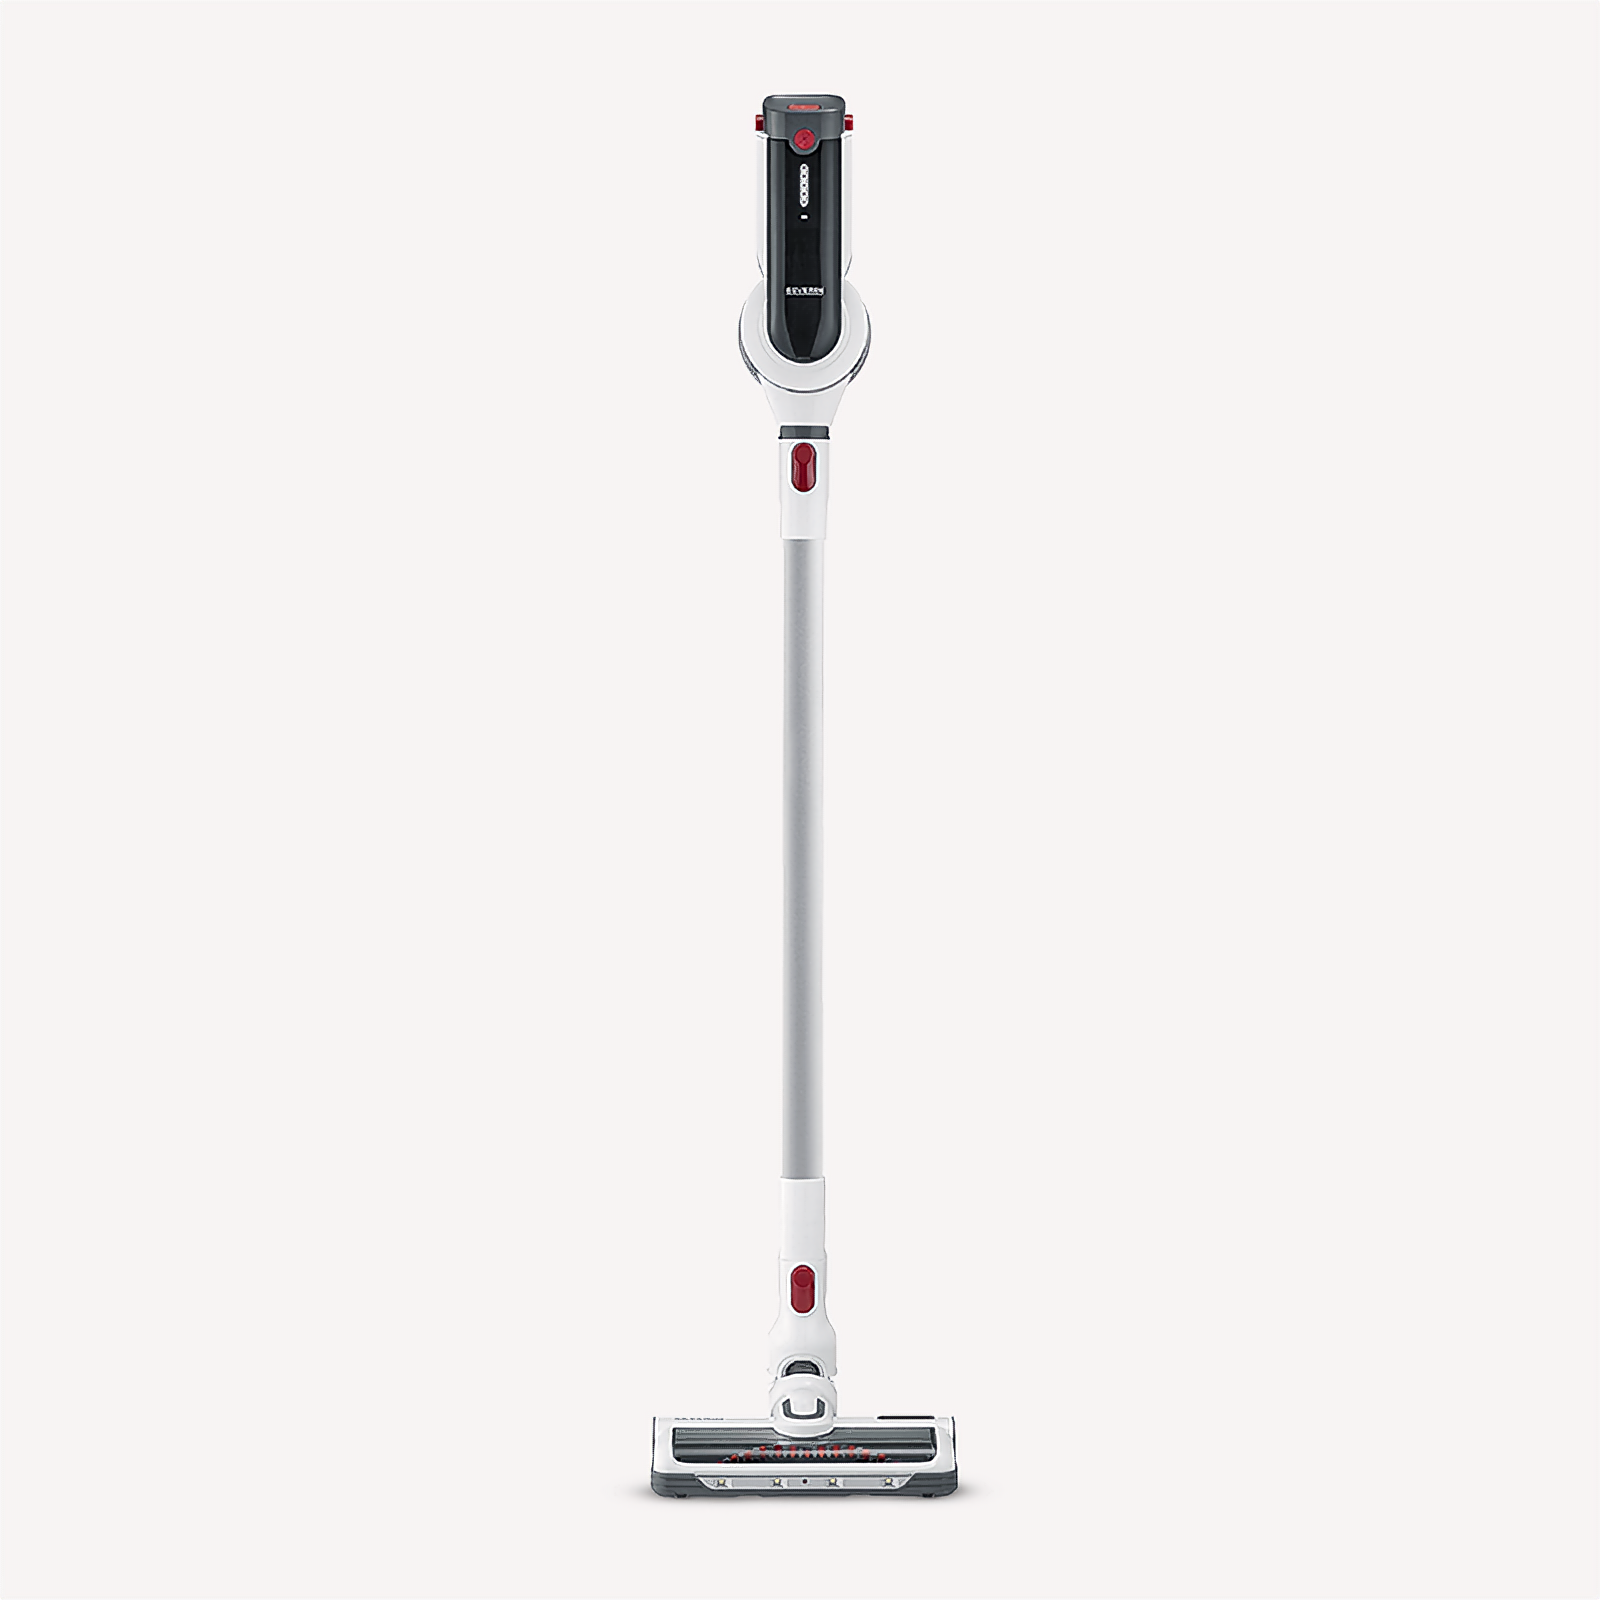 cleaner stick (Official) and 7166 SEVERIN hand vacuum HV 2-in-1 - Cordless